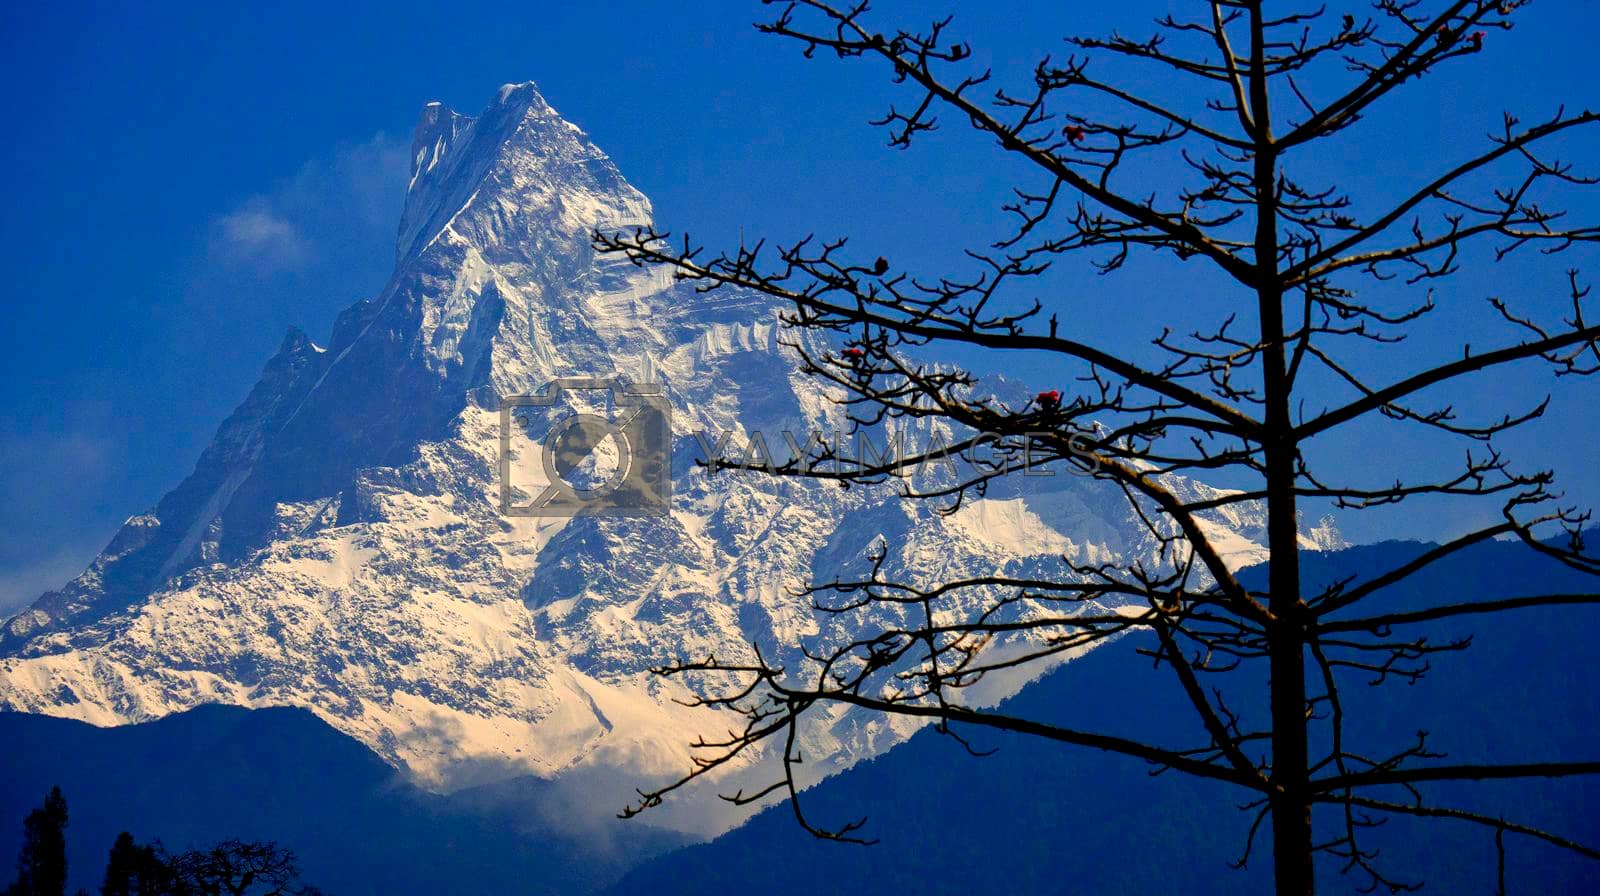 Royalty free image of Machapuchare Holy Mountain, Fish Tail, Annapurna Conservation Area,  Nepal  by alcaproac